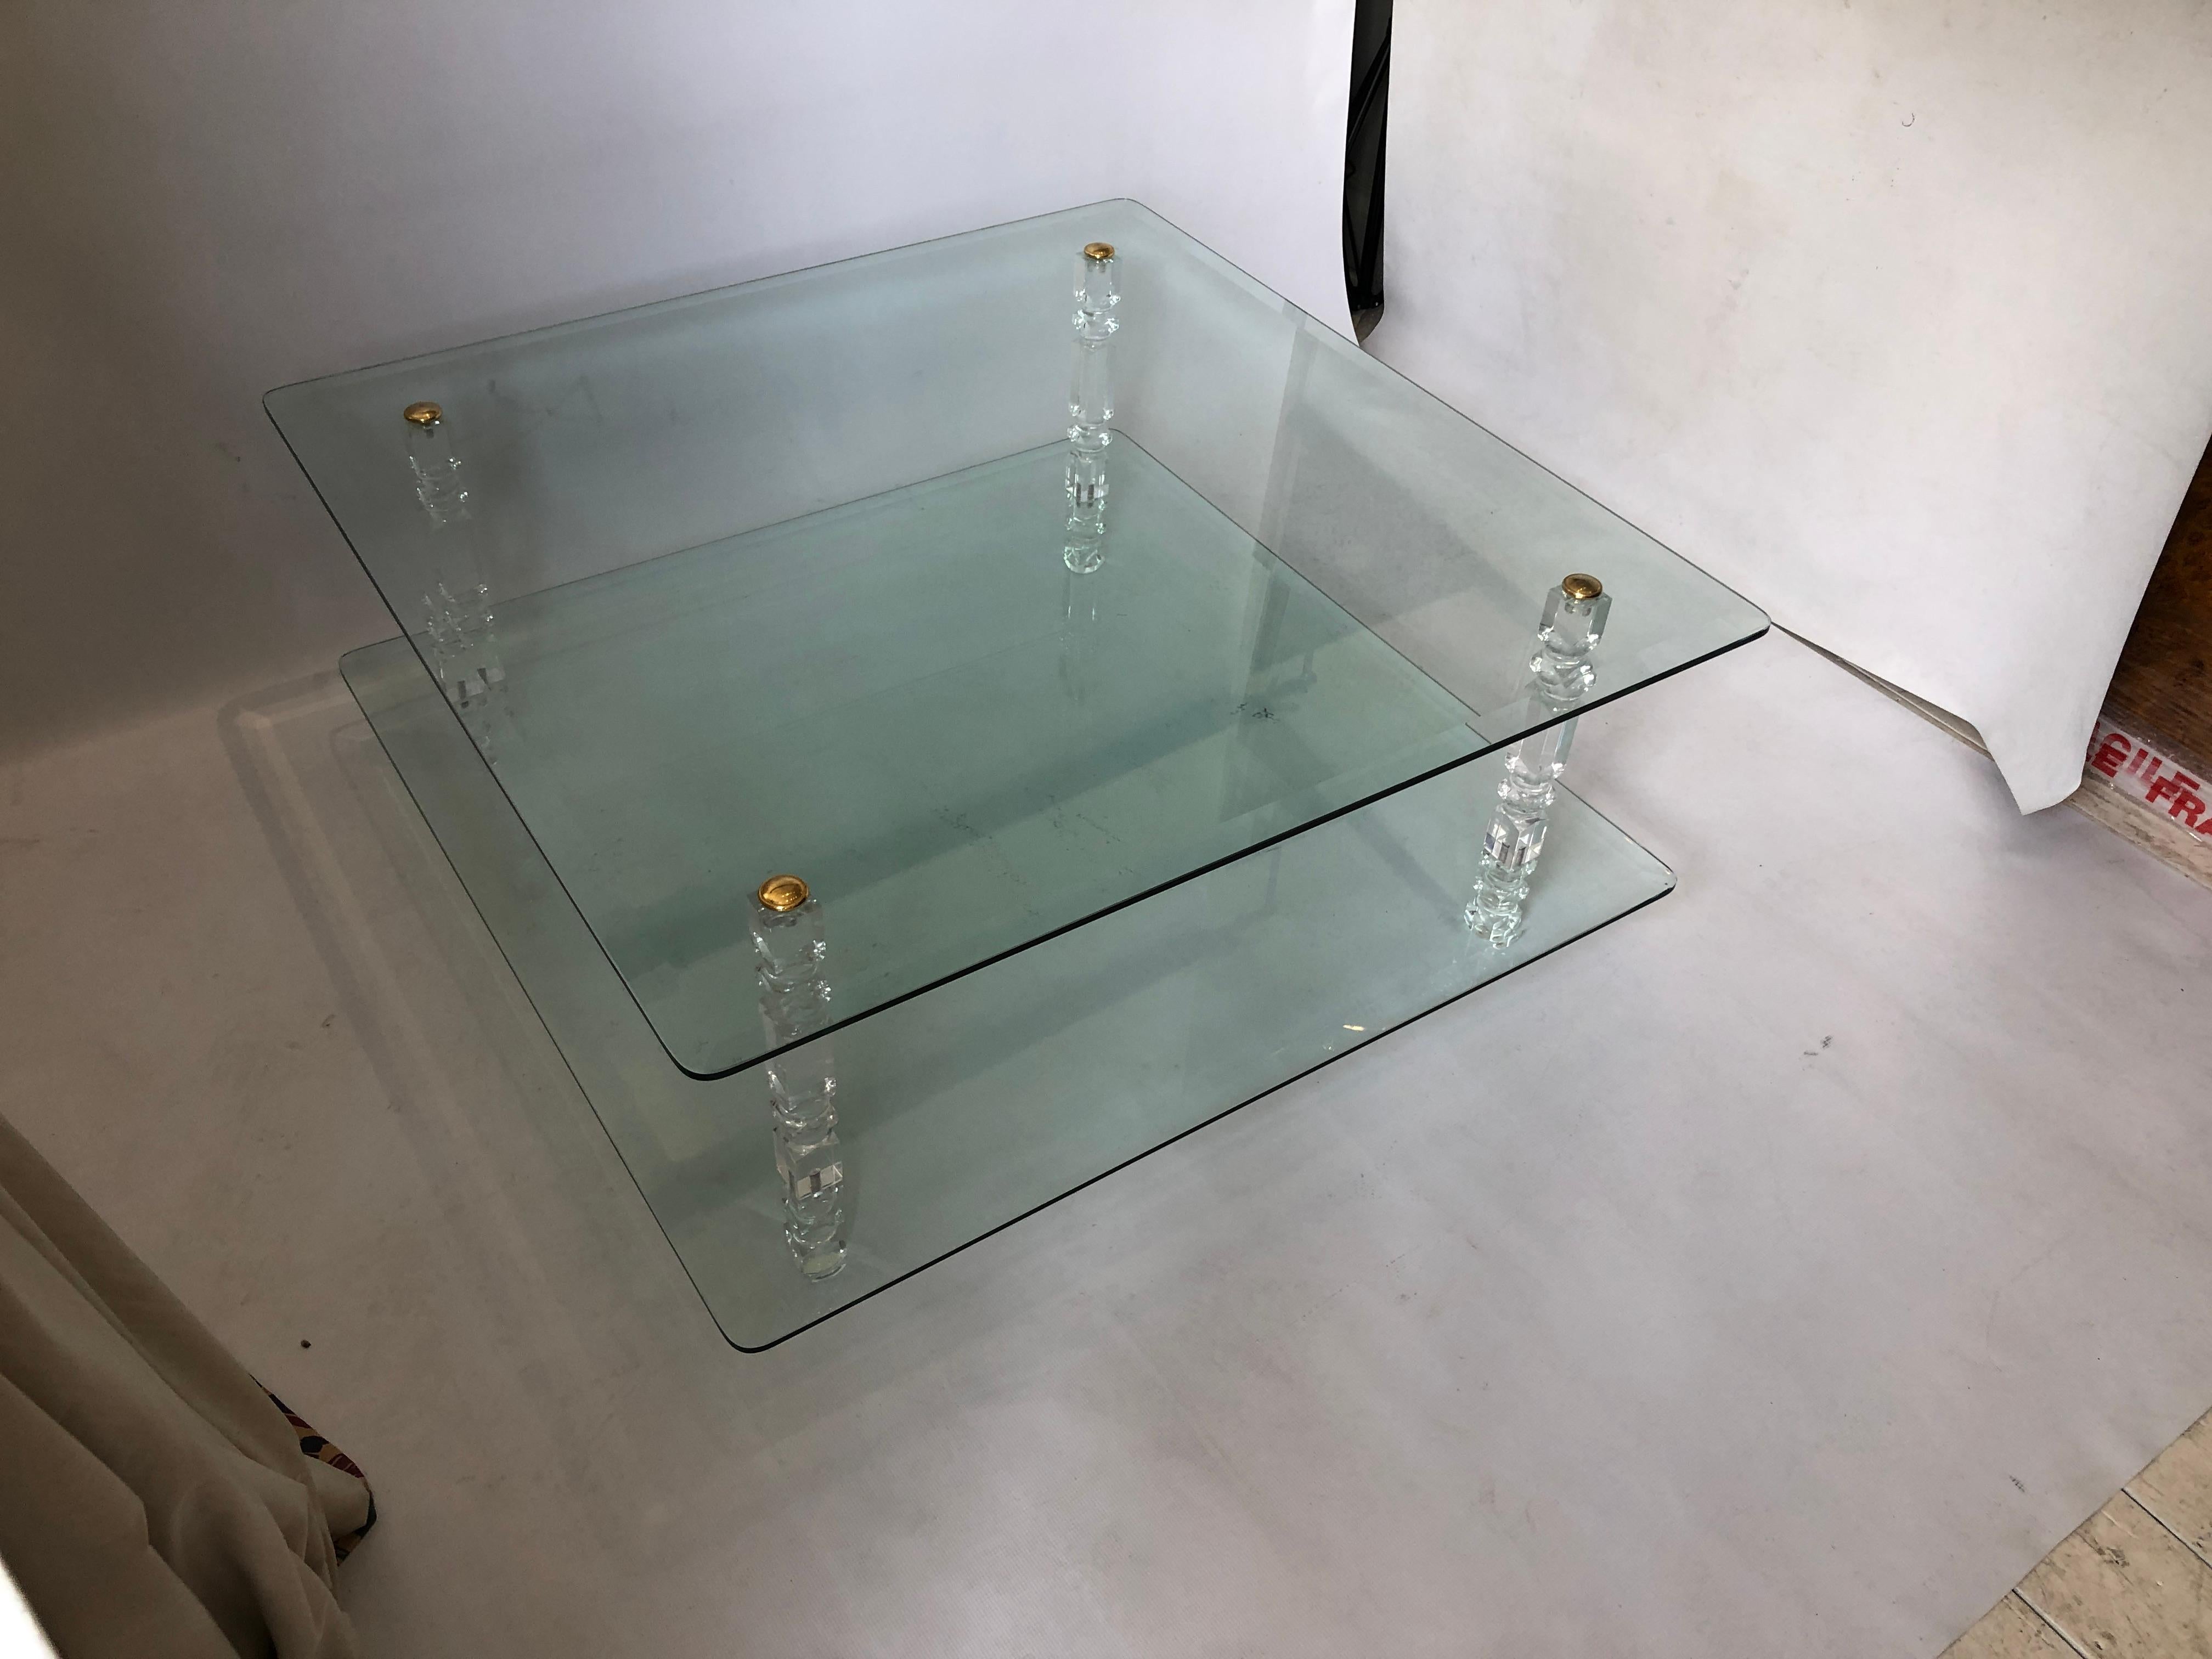 Post-Modern Two-Tier Lucite Glass Brass Coffee Table 1970s Modernist Charles Hollis Jones For Sale